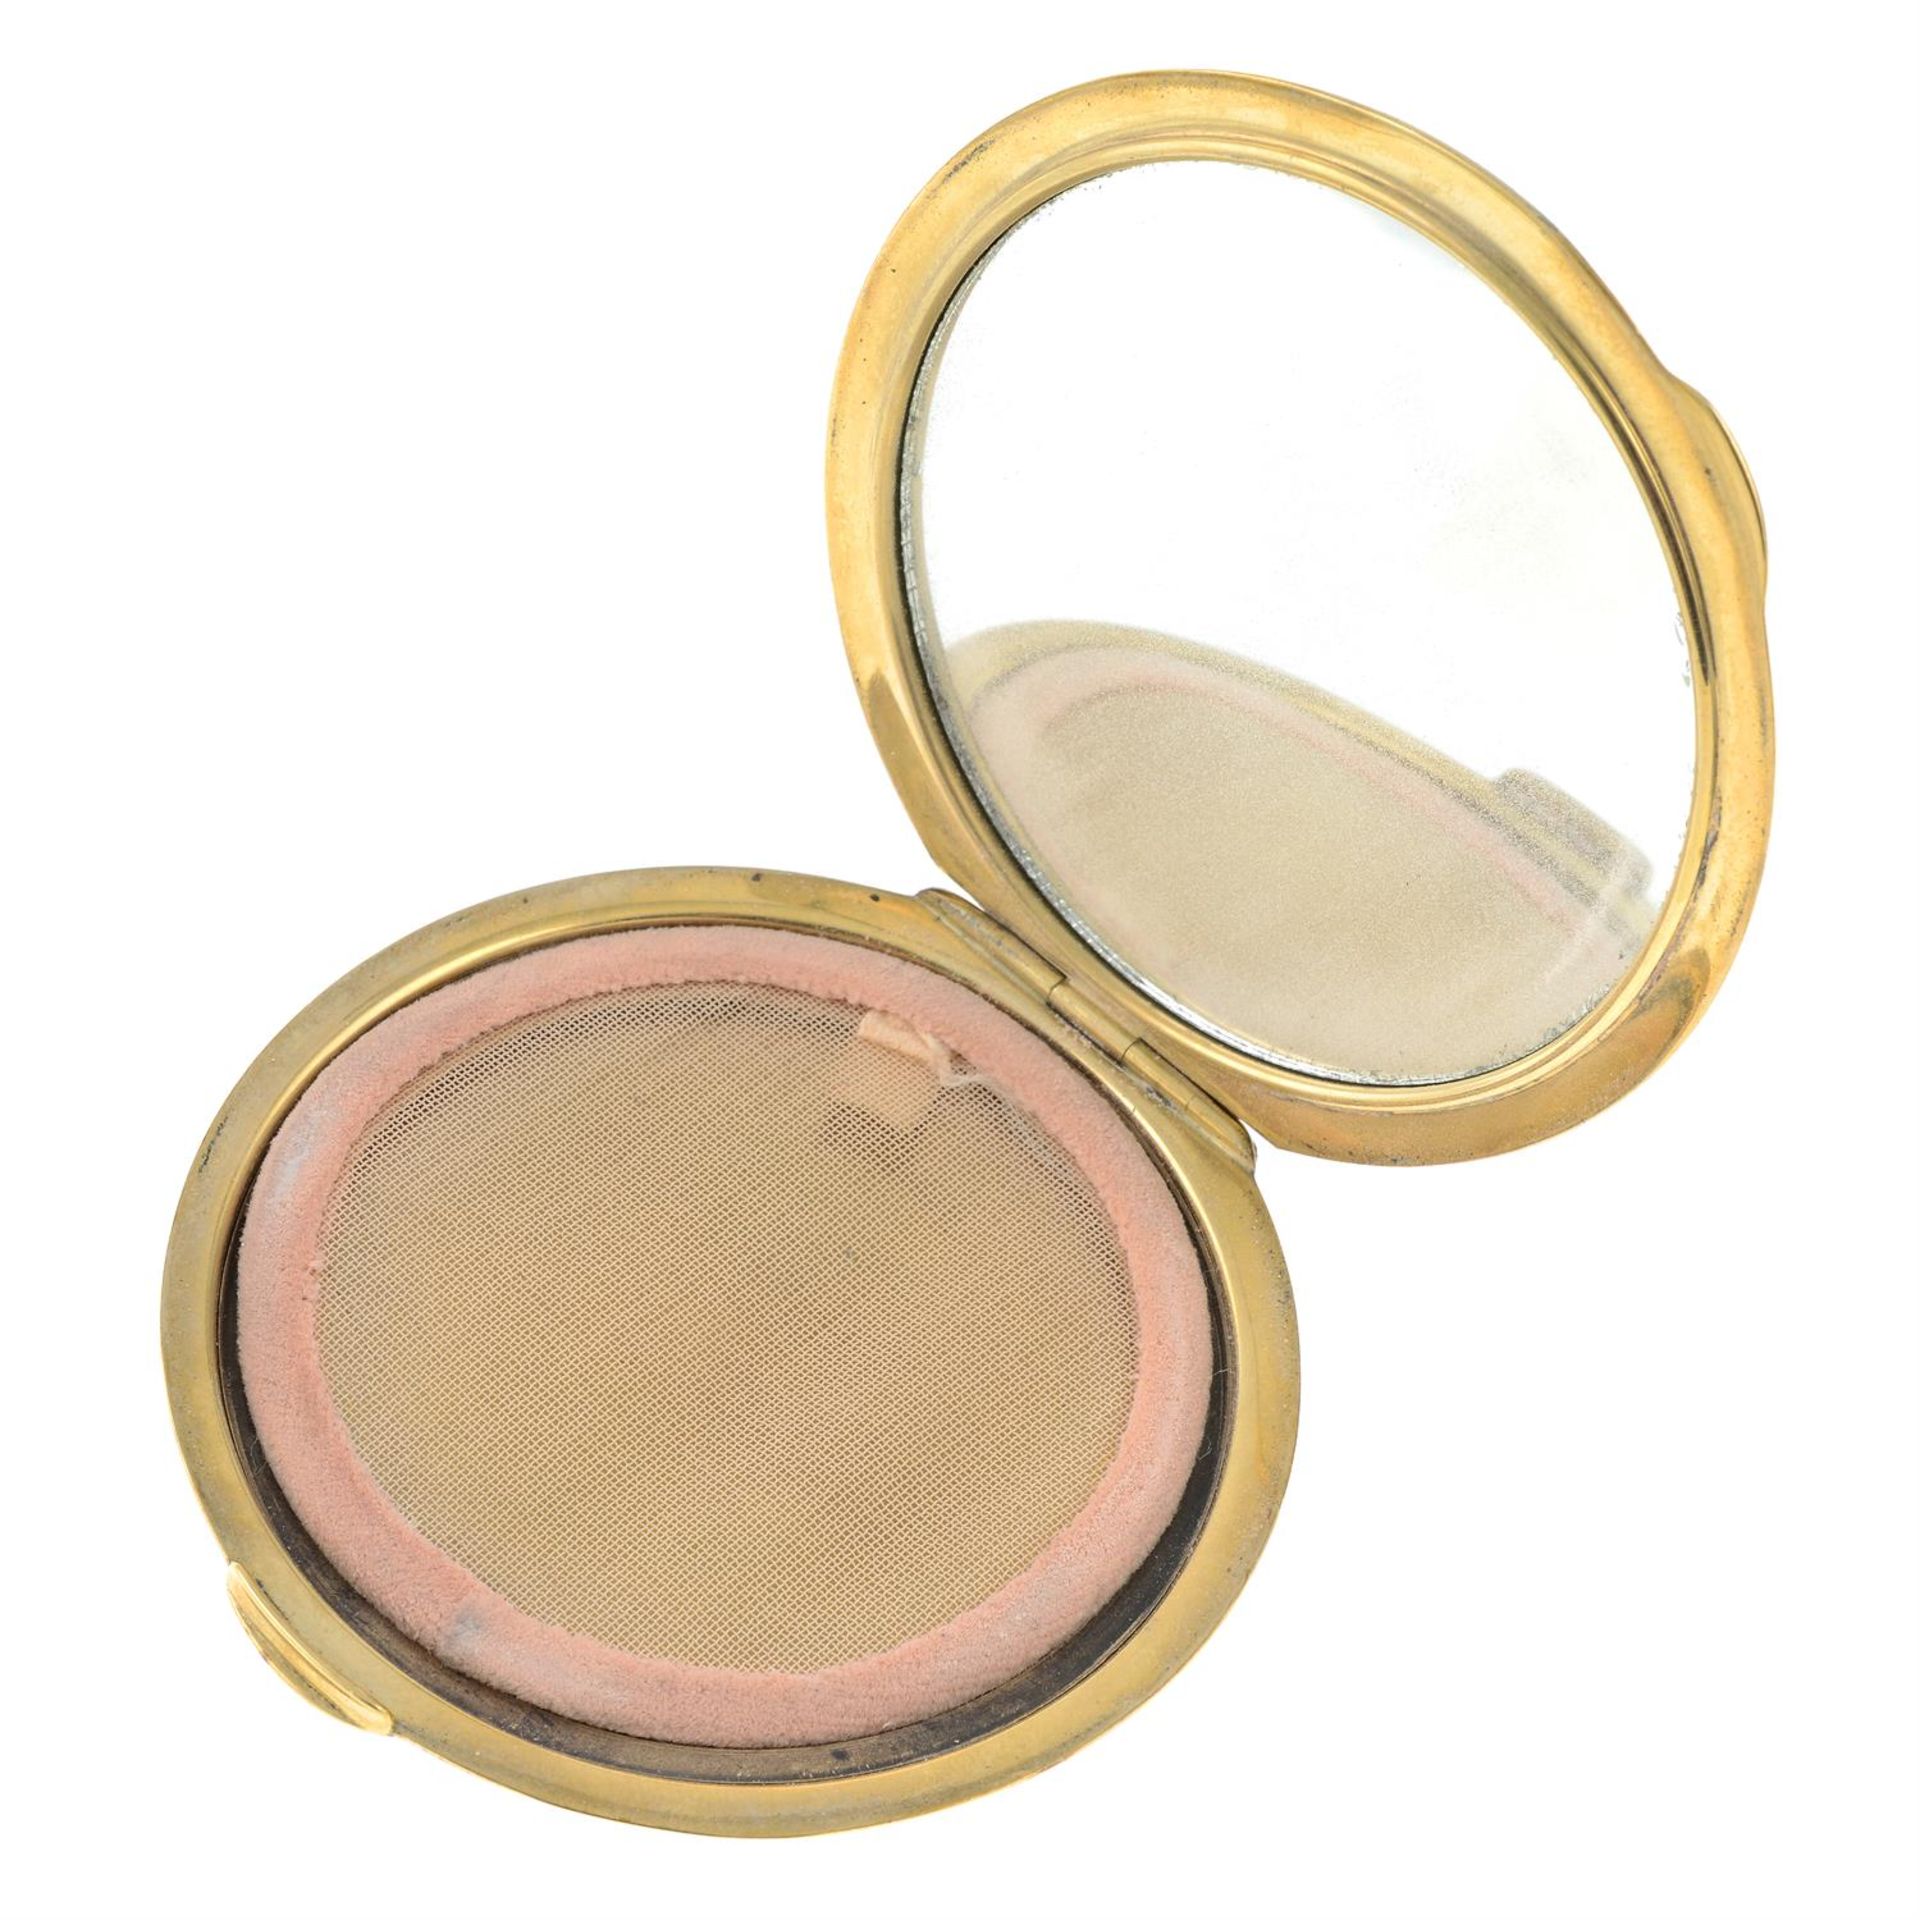 An early 20th century 9ct gold powder compact. - Image 3 of 3